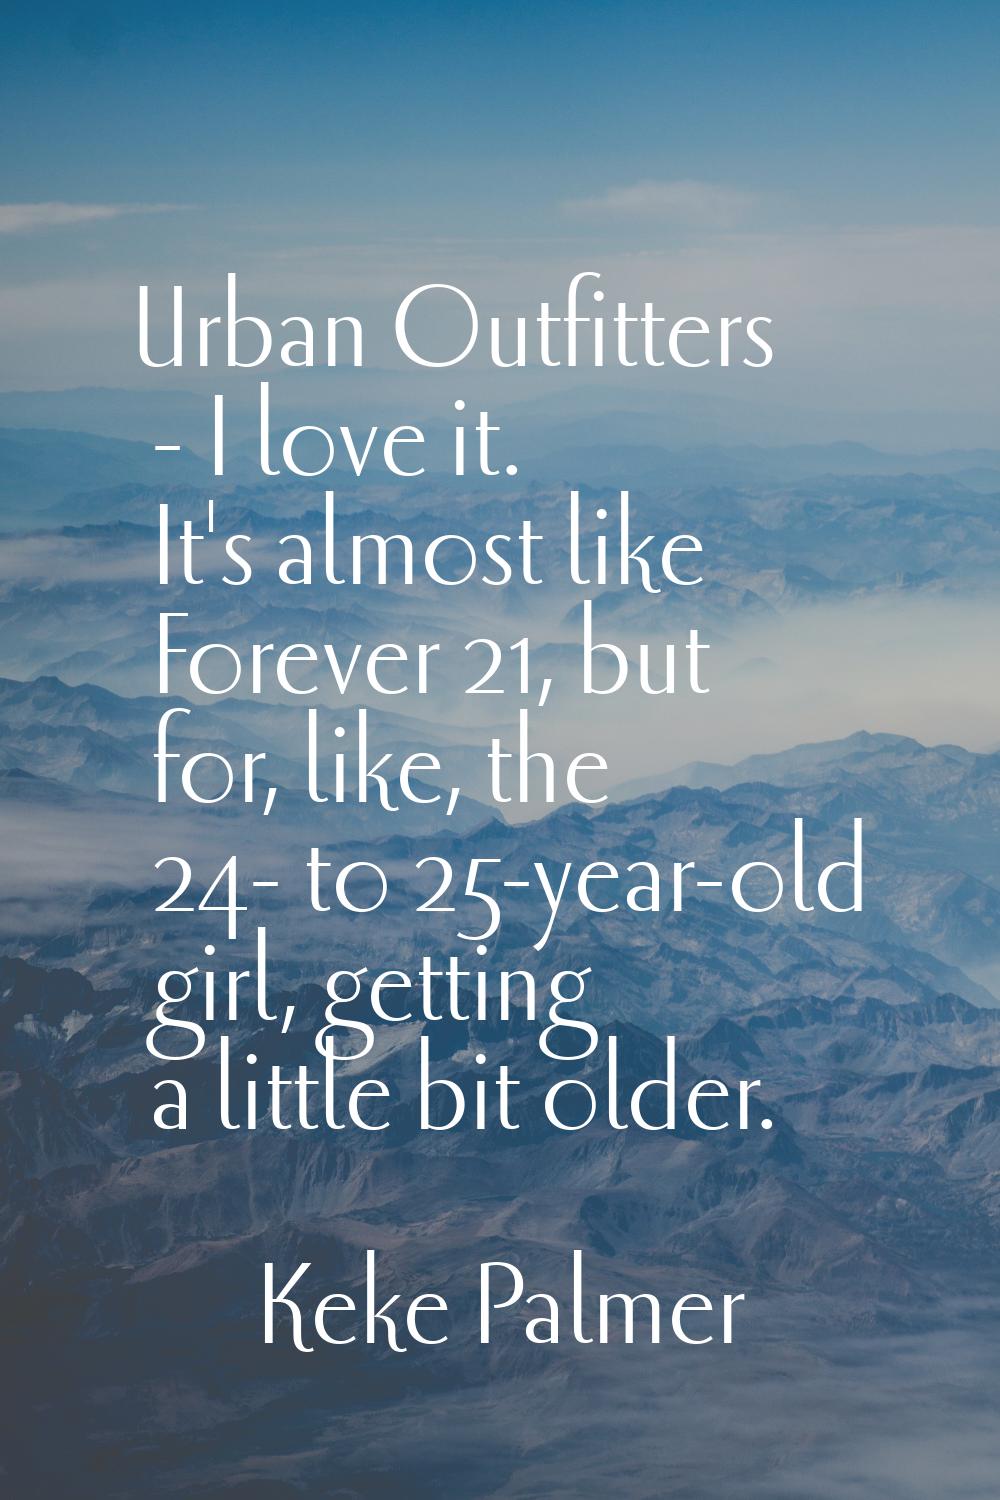 Urban Outfitters - I love it. It's almost like Forever 21, but for, like, the 24- to 25-year-old gi